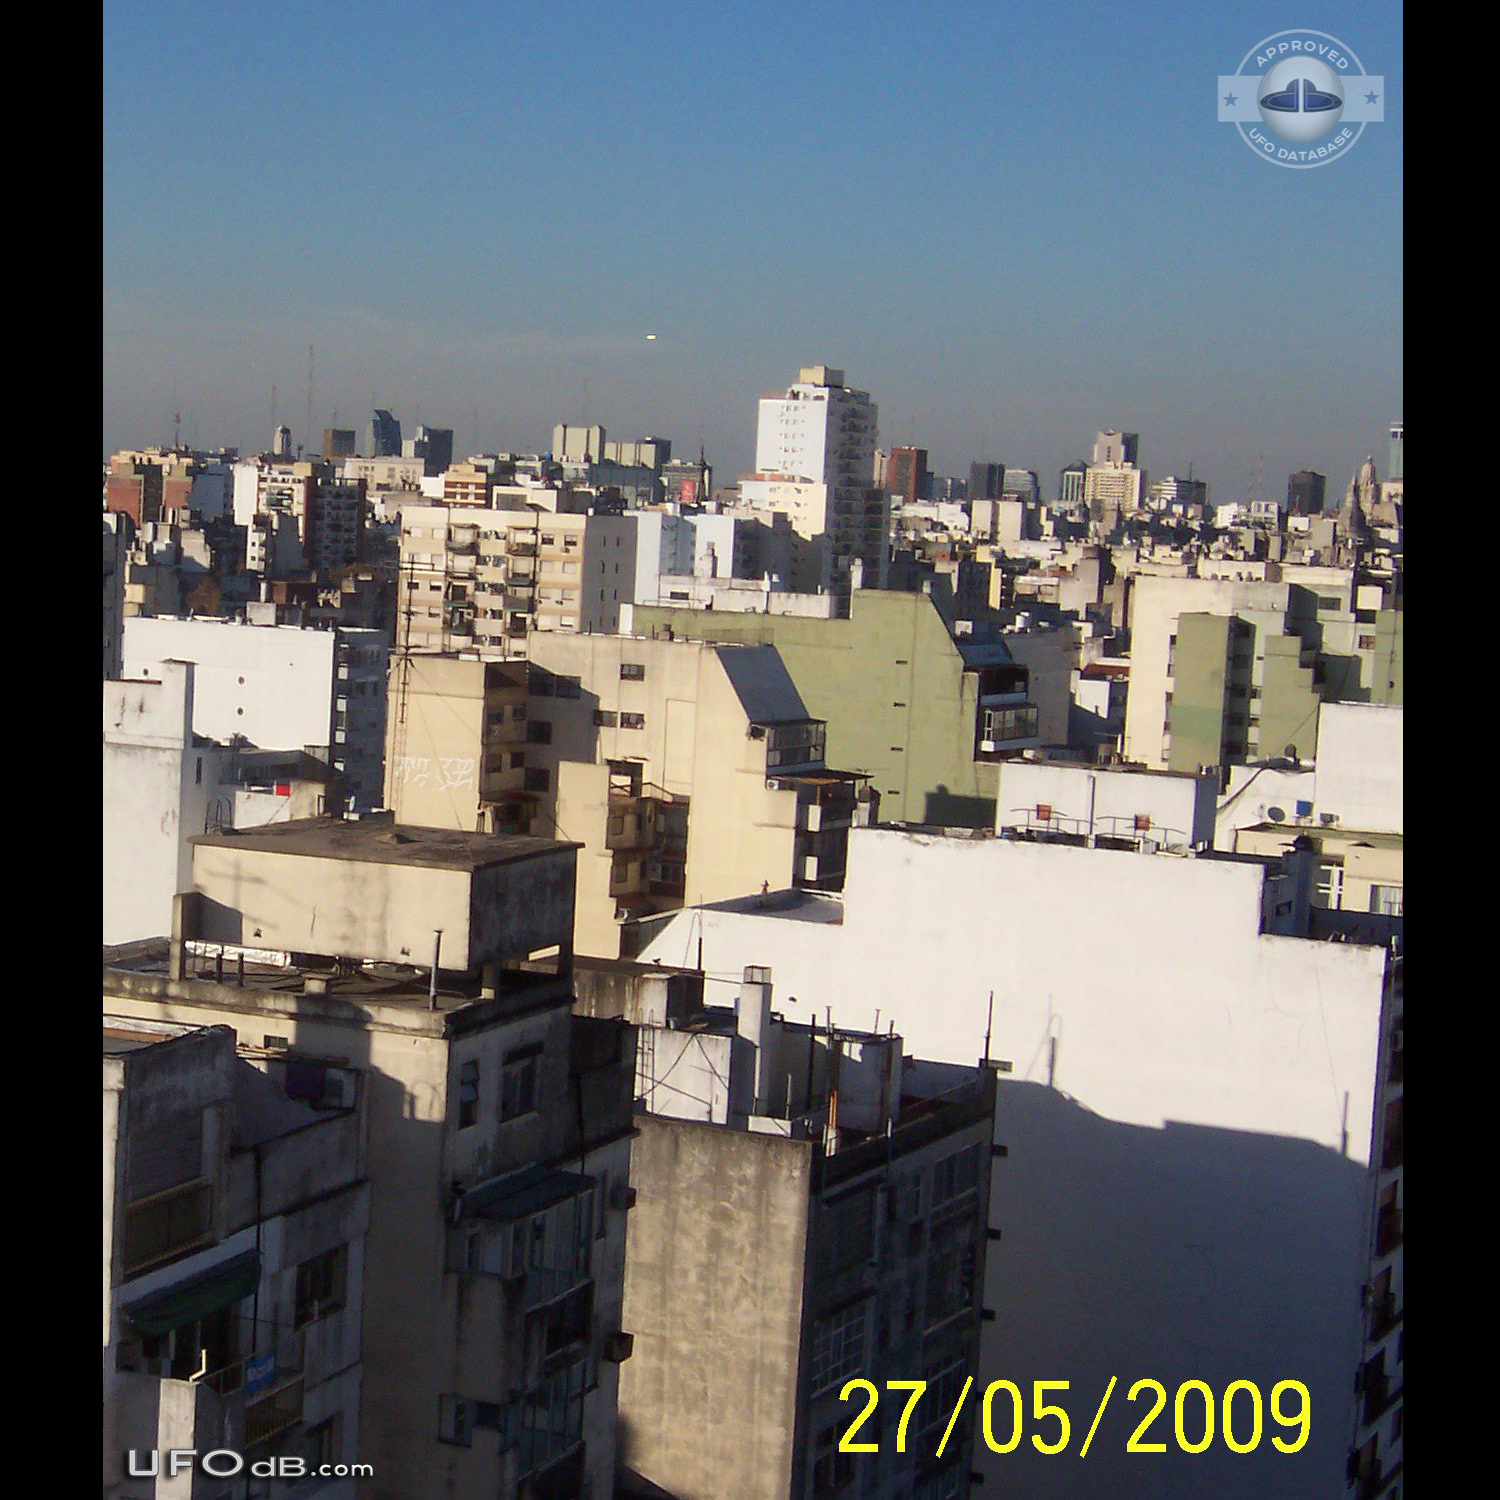 Friends Picture reveals UFO over Buenos Aires in Argentina May 2009 UFO Picture #607-1